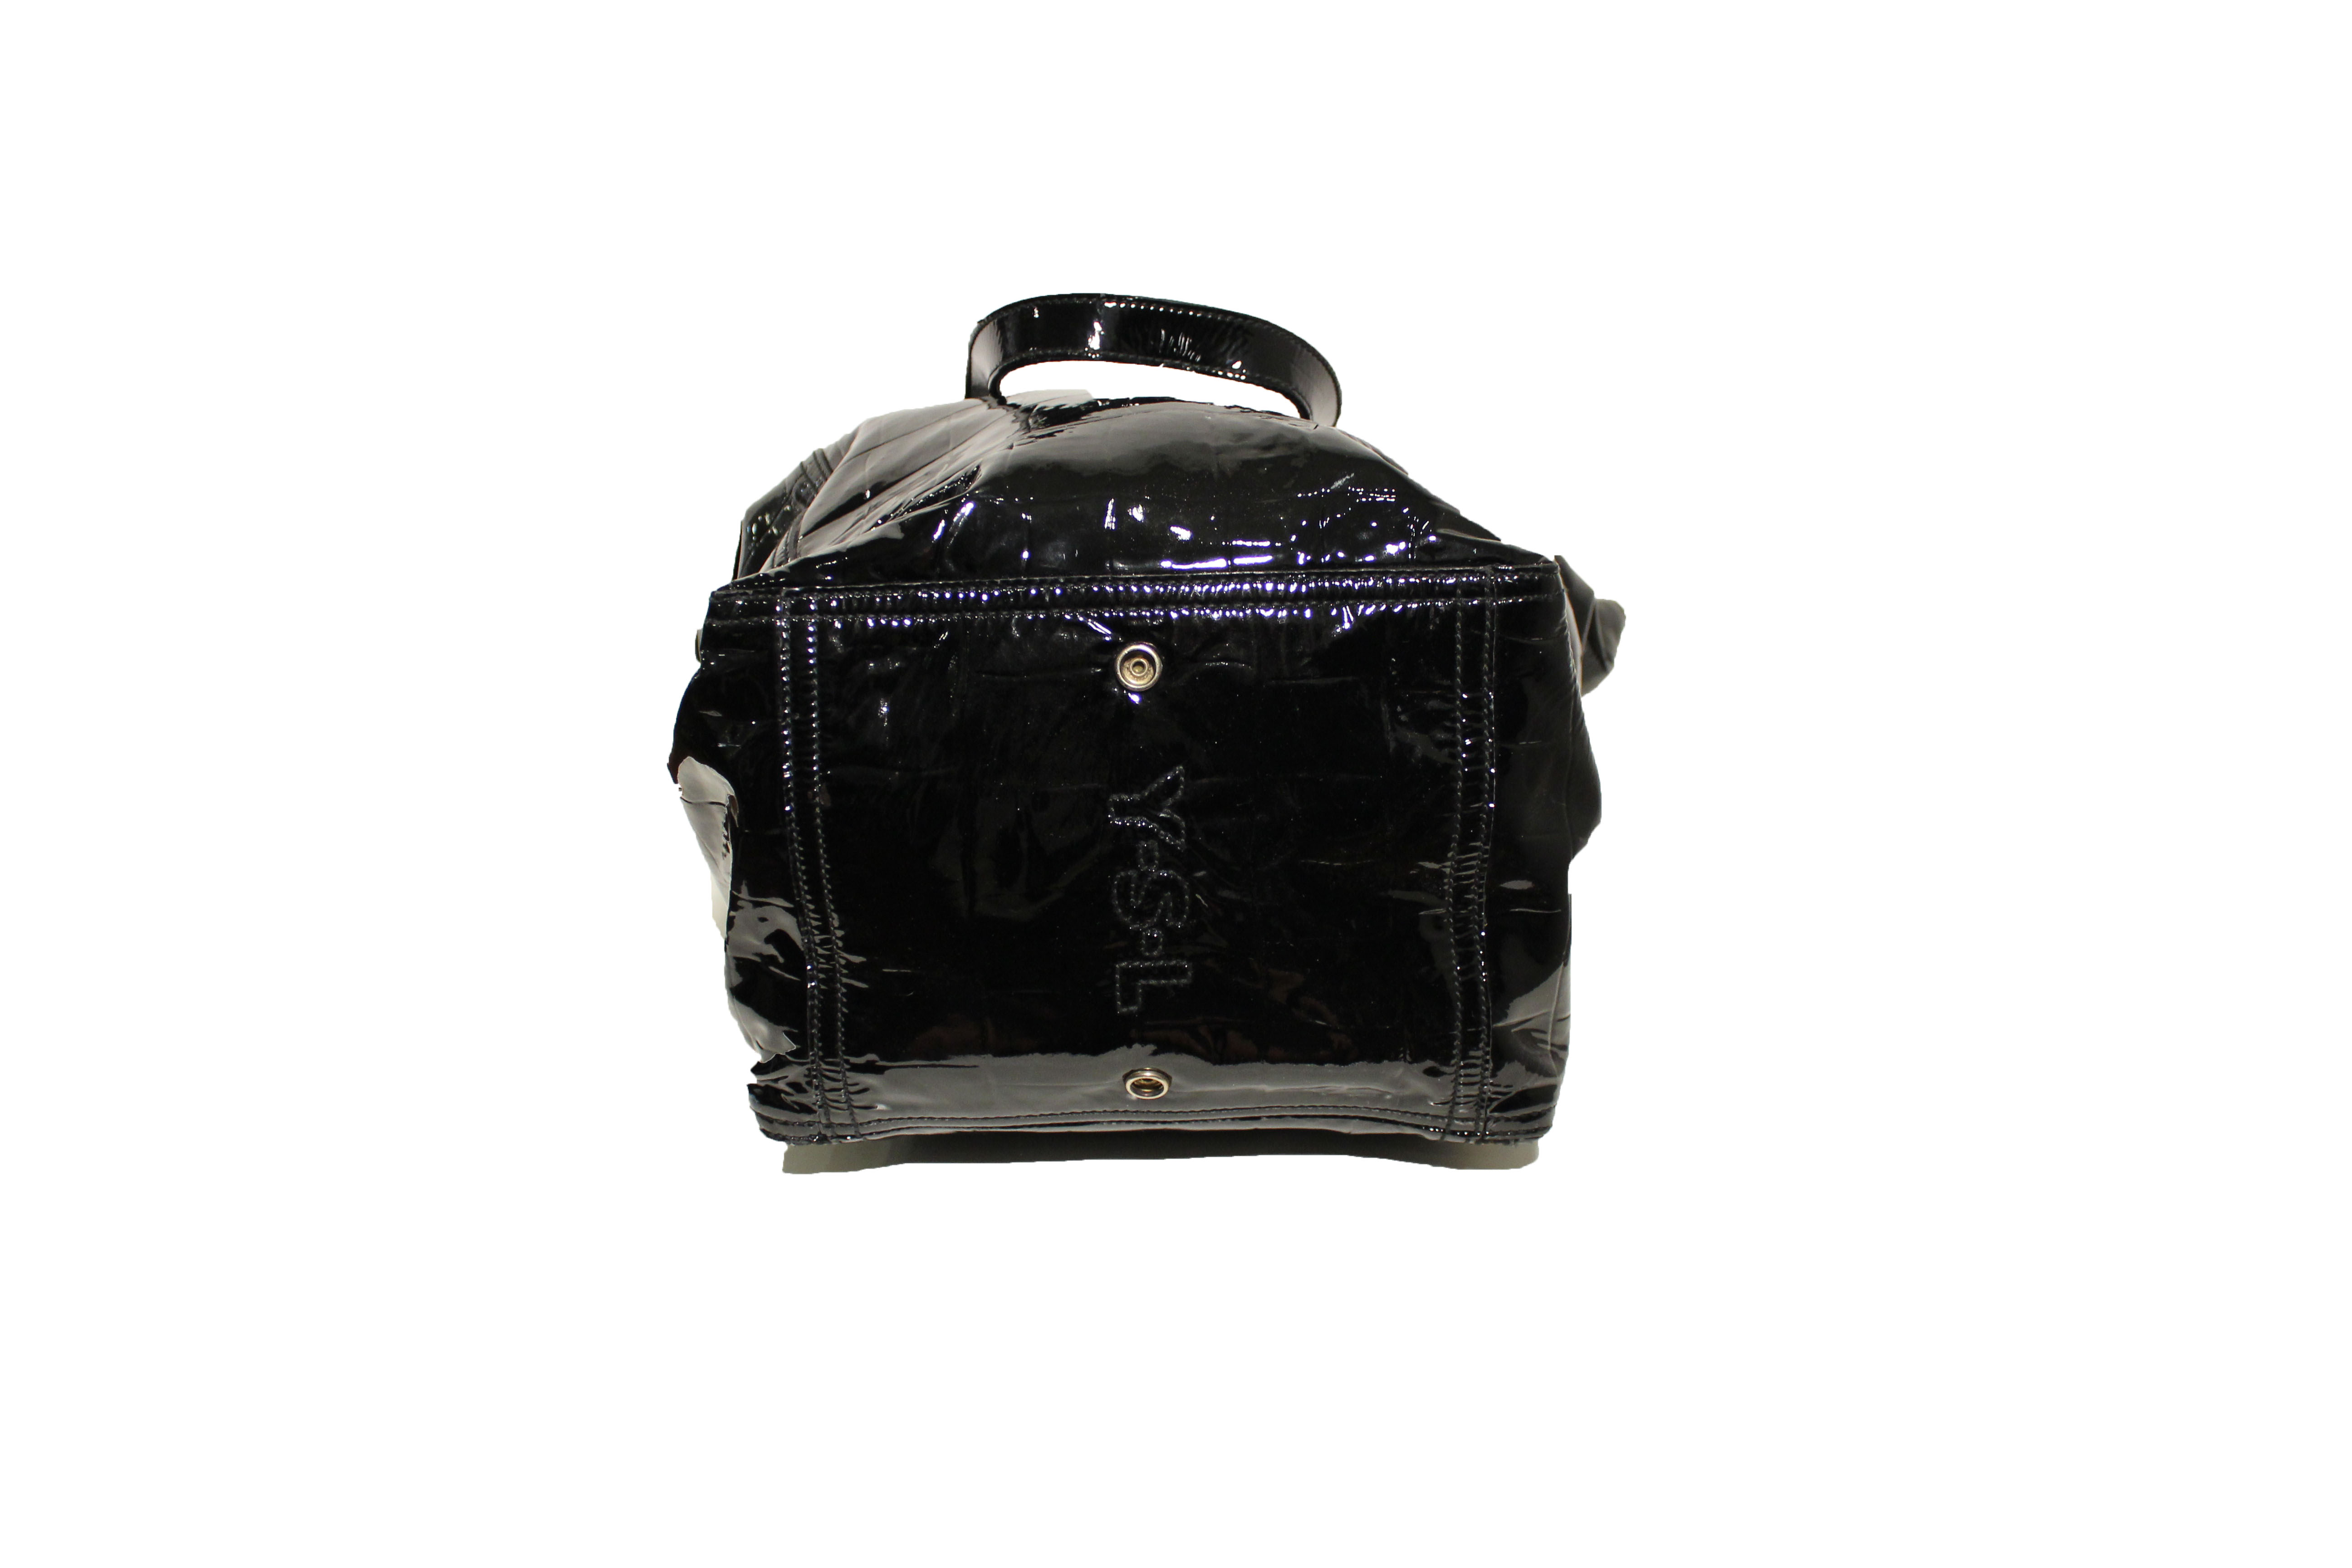 ysl black patent leather travel bag downtown  